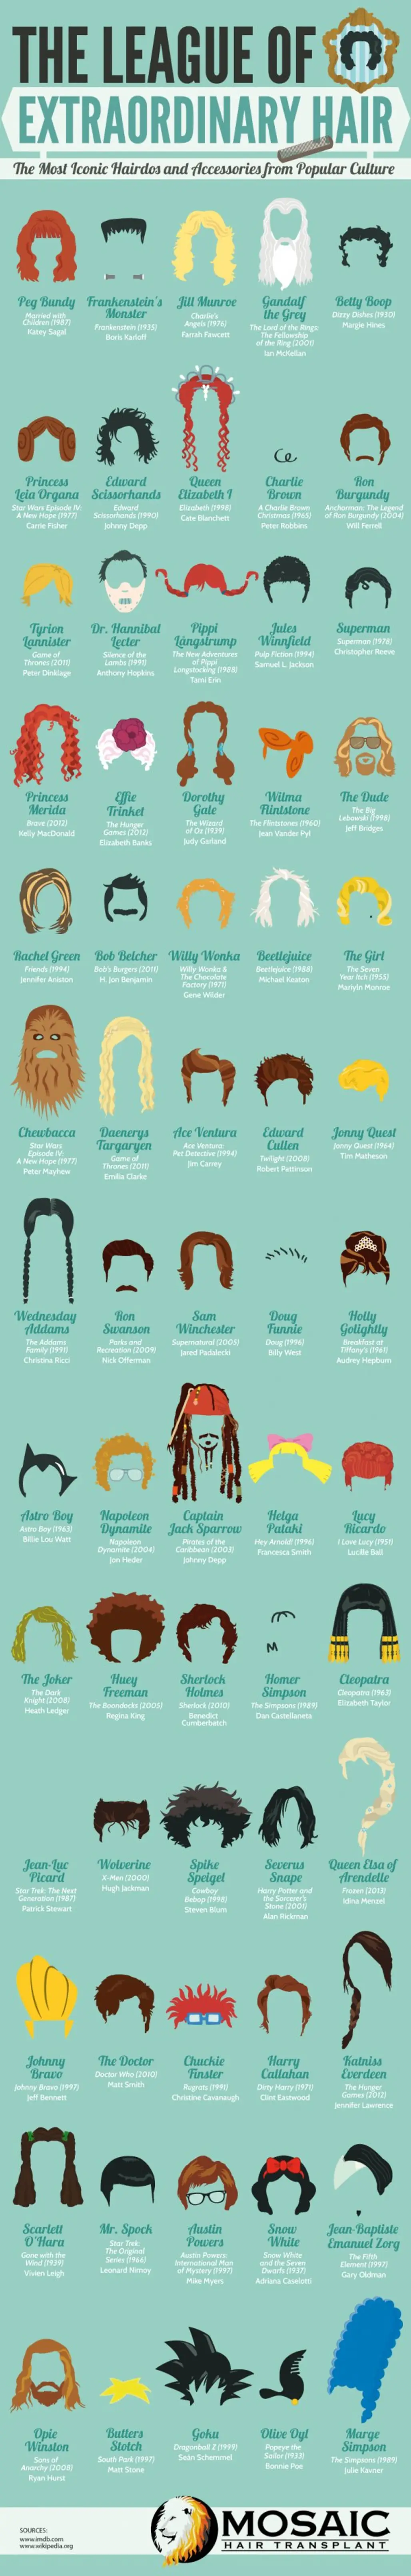 Iconic Hairstyles